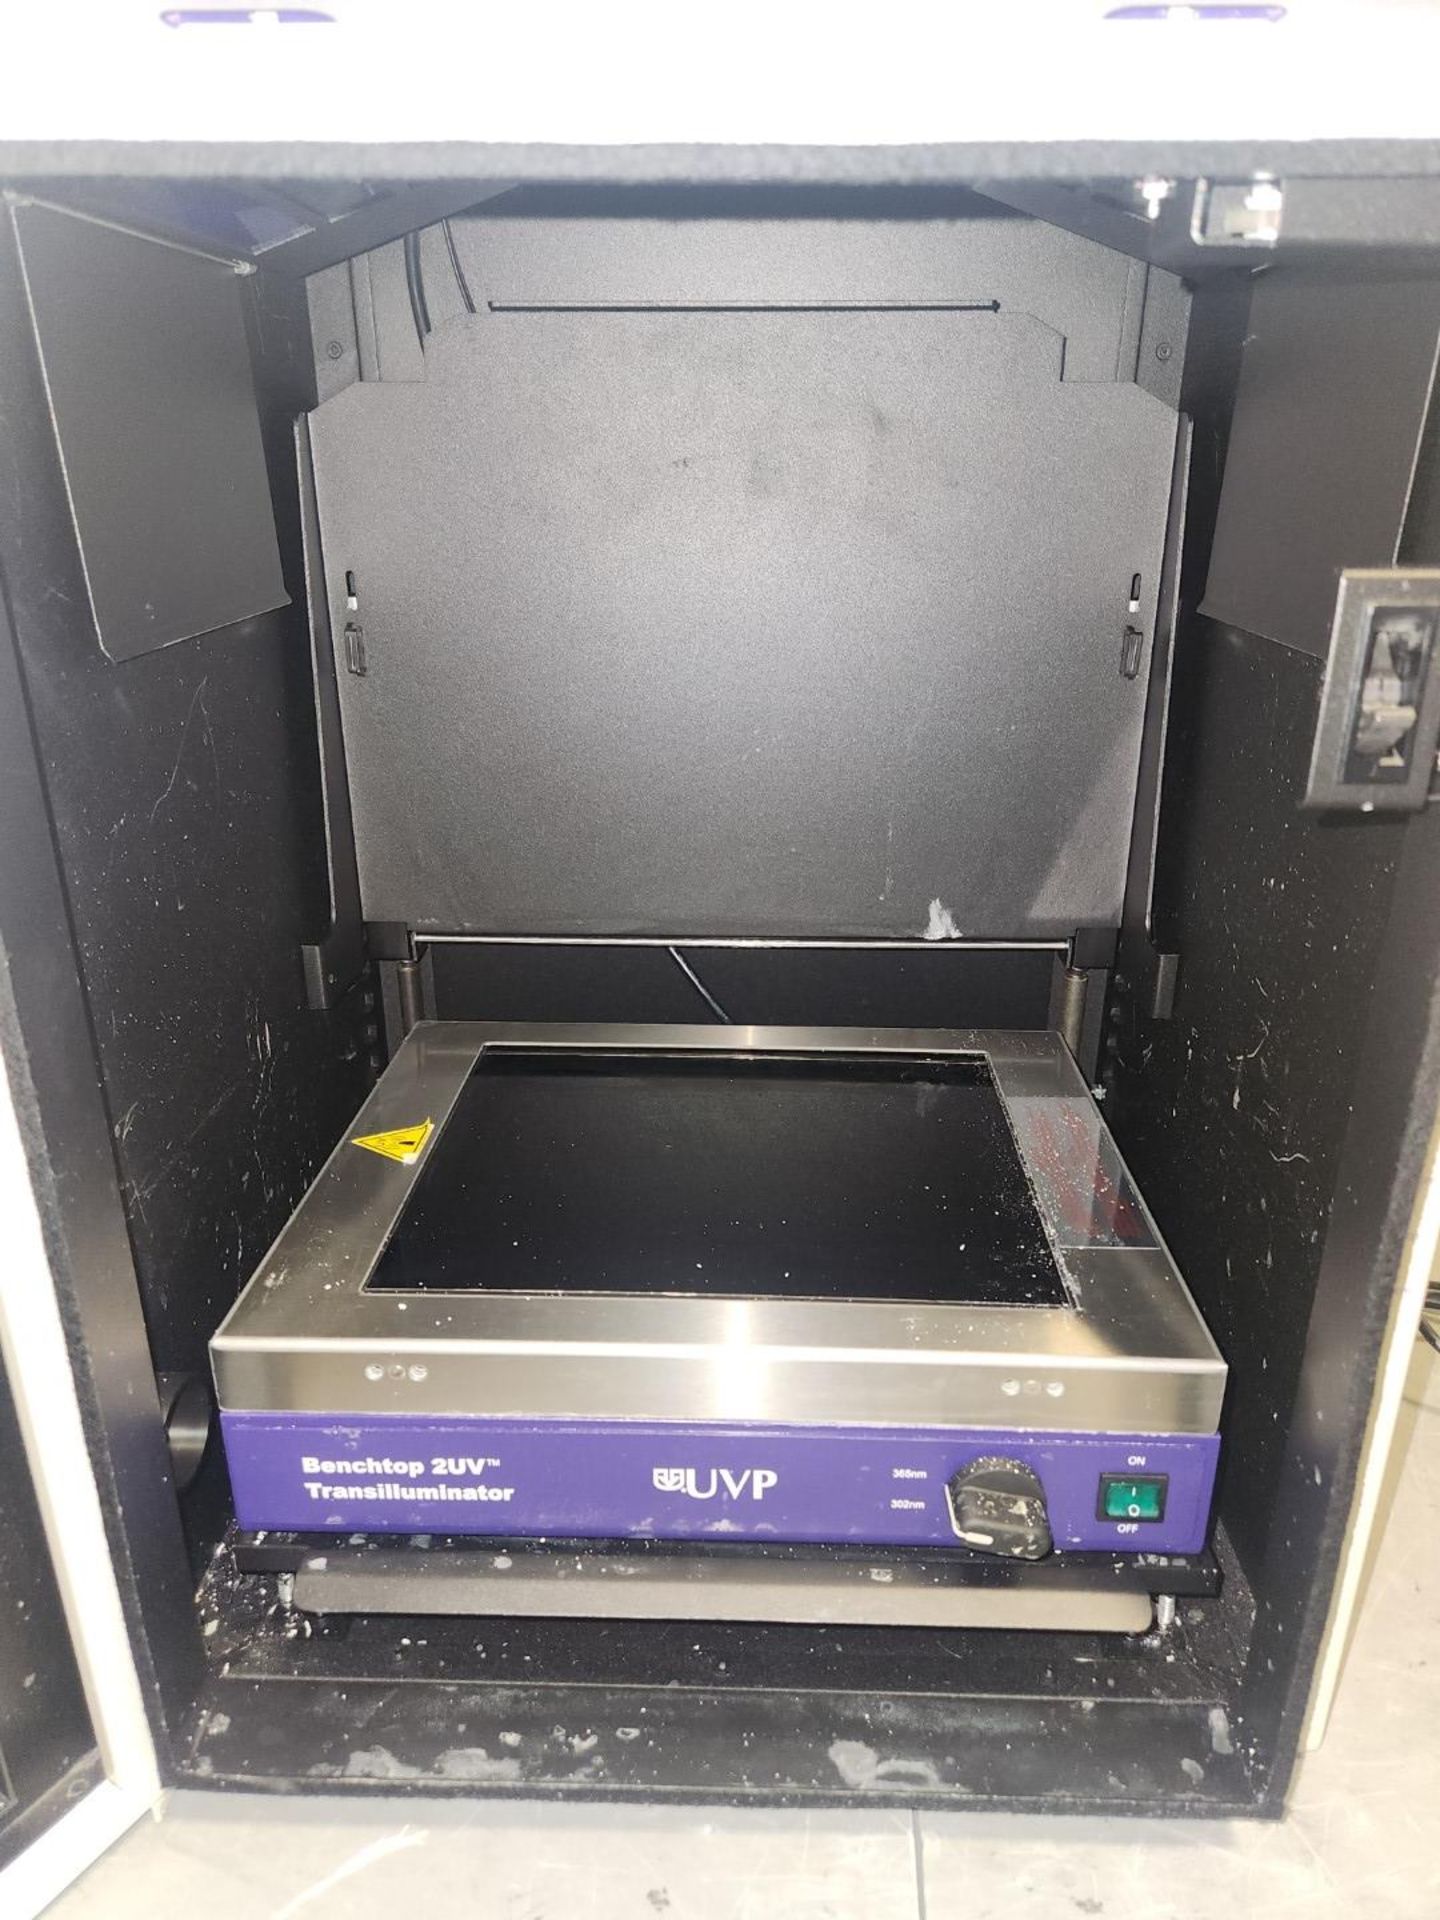 UVP Biospectrum Multispectral imaging system, model 800, with camera and transilluminator, with - Image 3 of 8